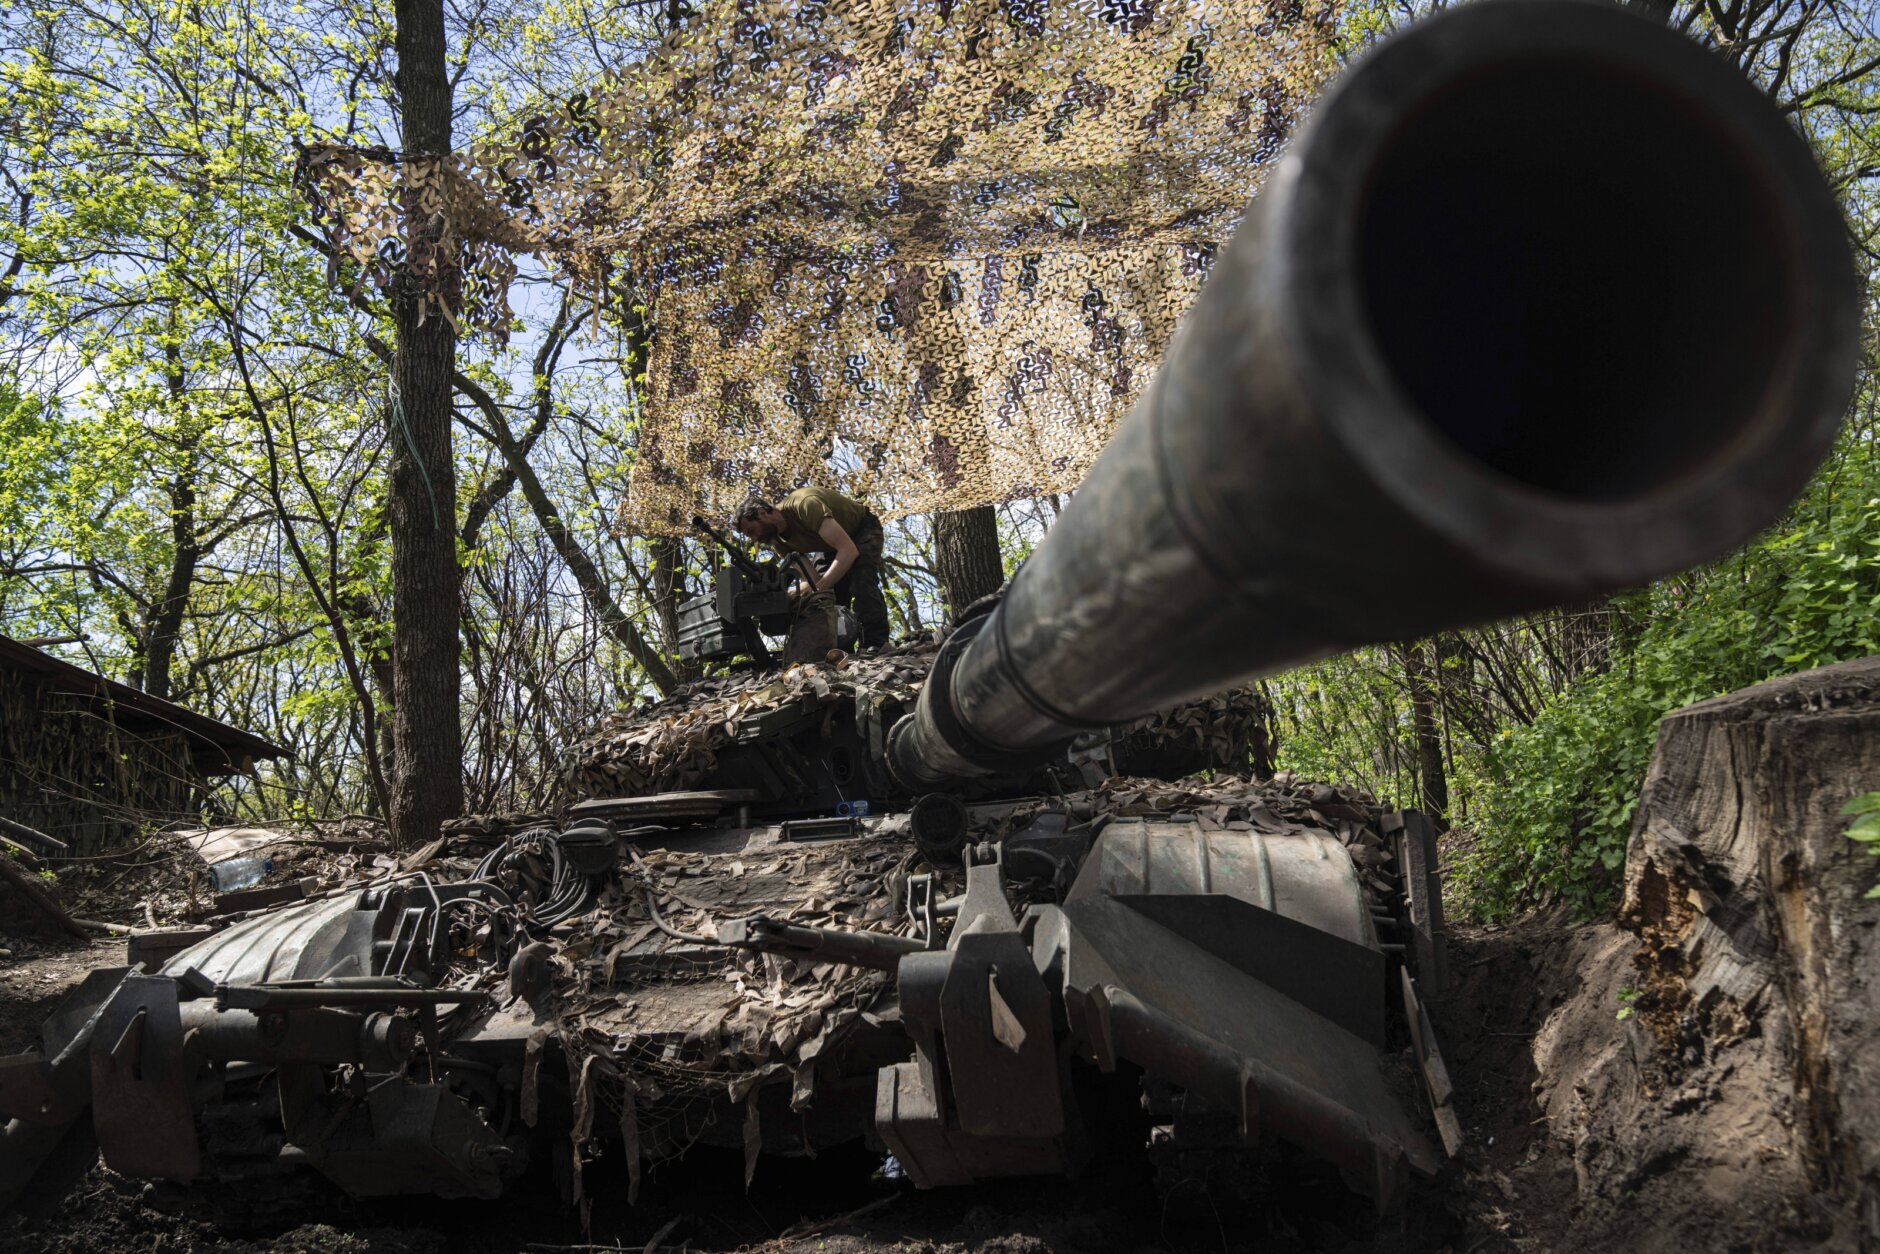 <p>Ukrainian serviceman install a machine gun on the tank during the repair works after fighting against Russian forces in Donetsk region, eastern Ukraine, Wednesday, April 27, 2022. (AP Photo/Evgeniy Maloletka)</p>
